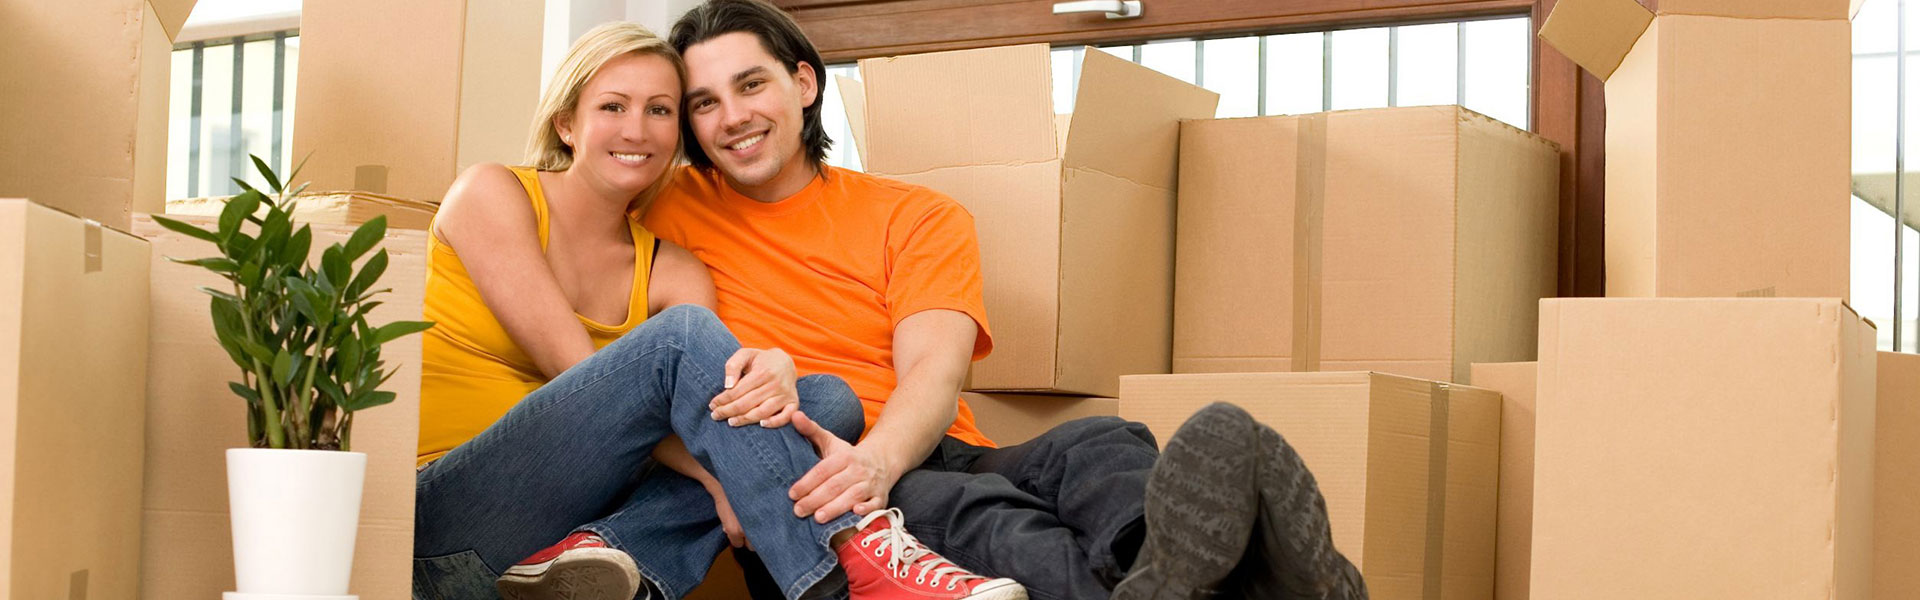 movers and packers ujjain